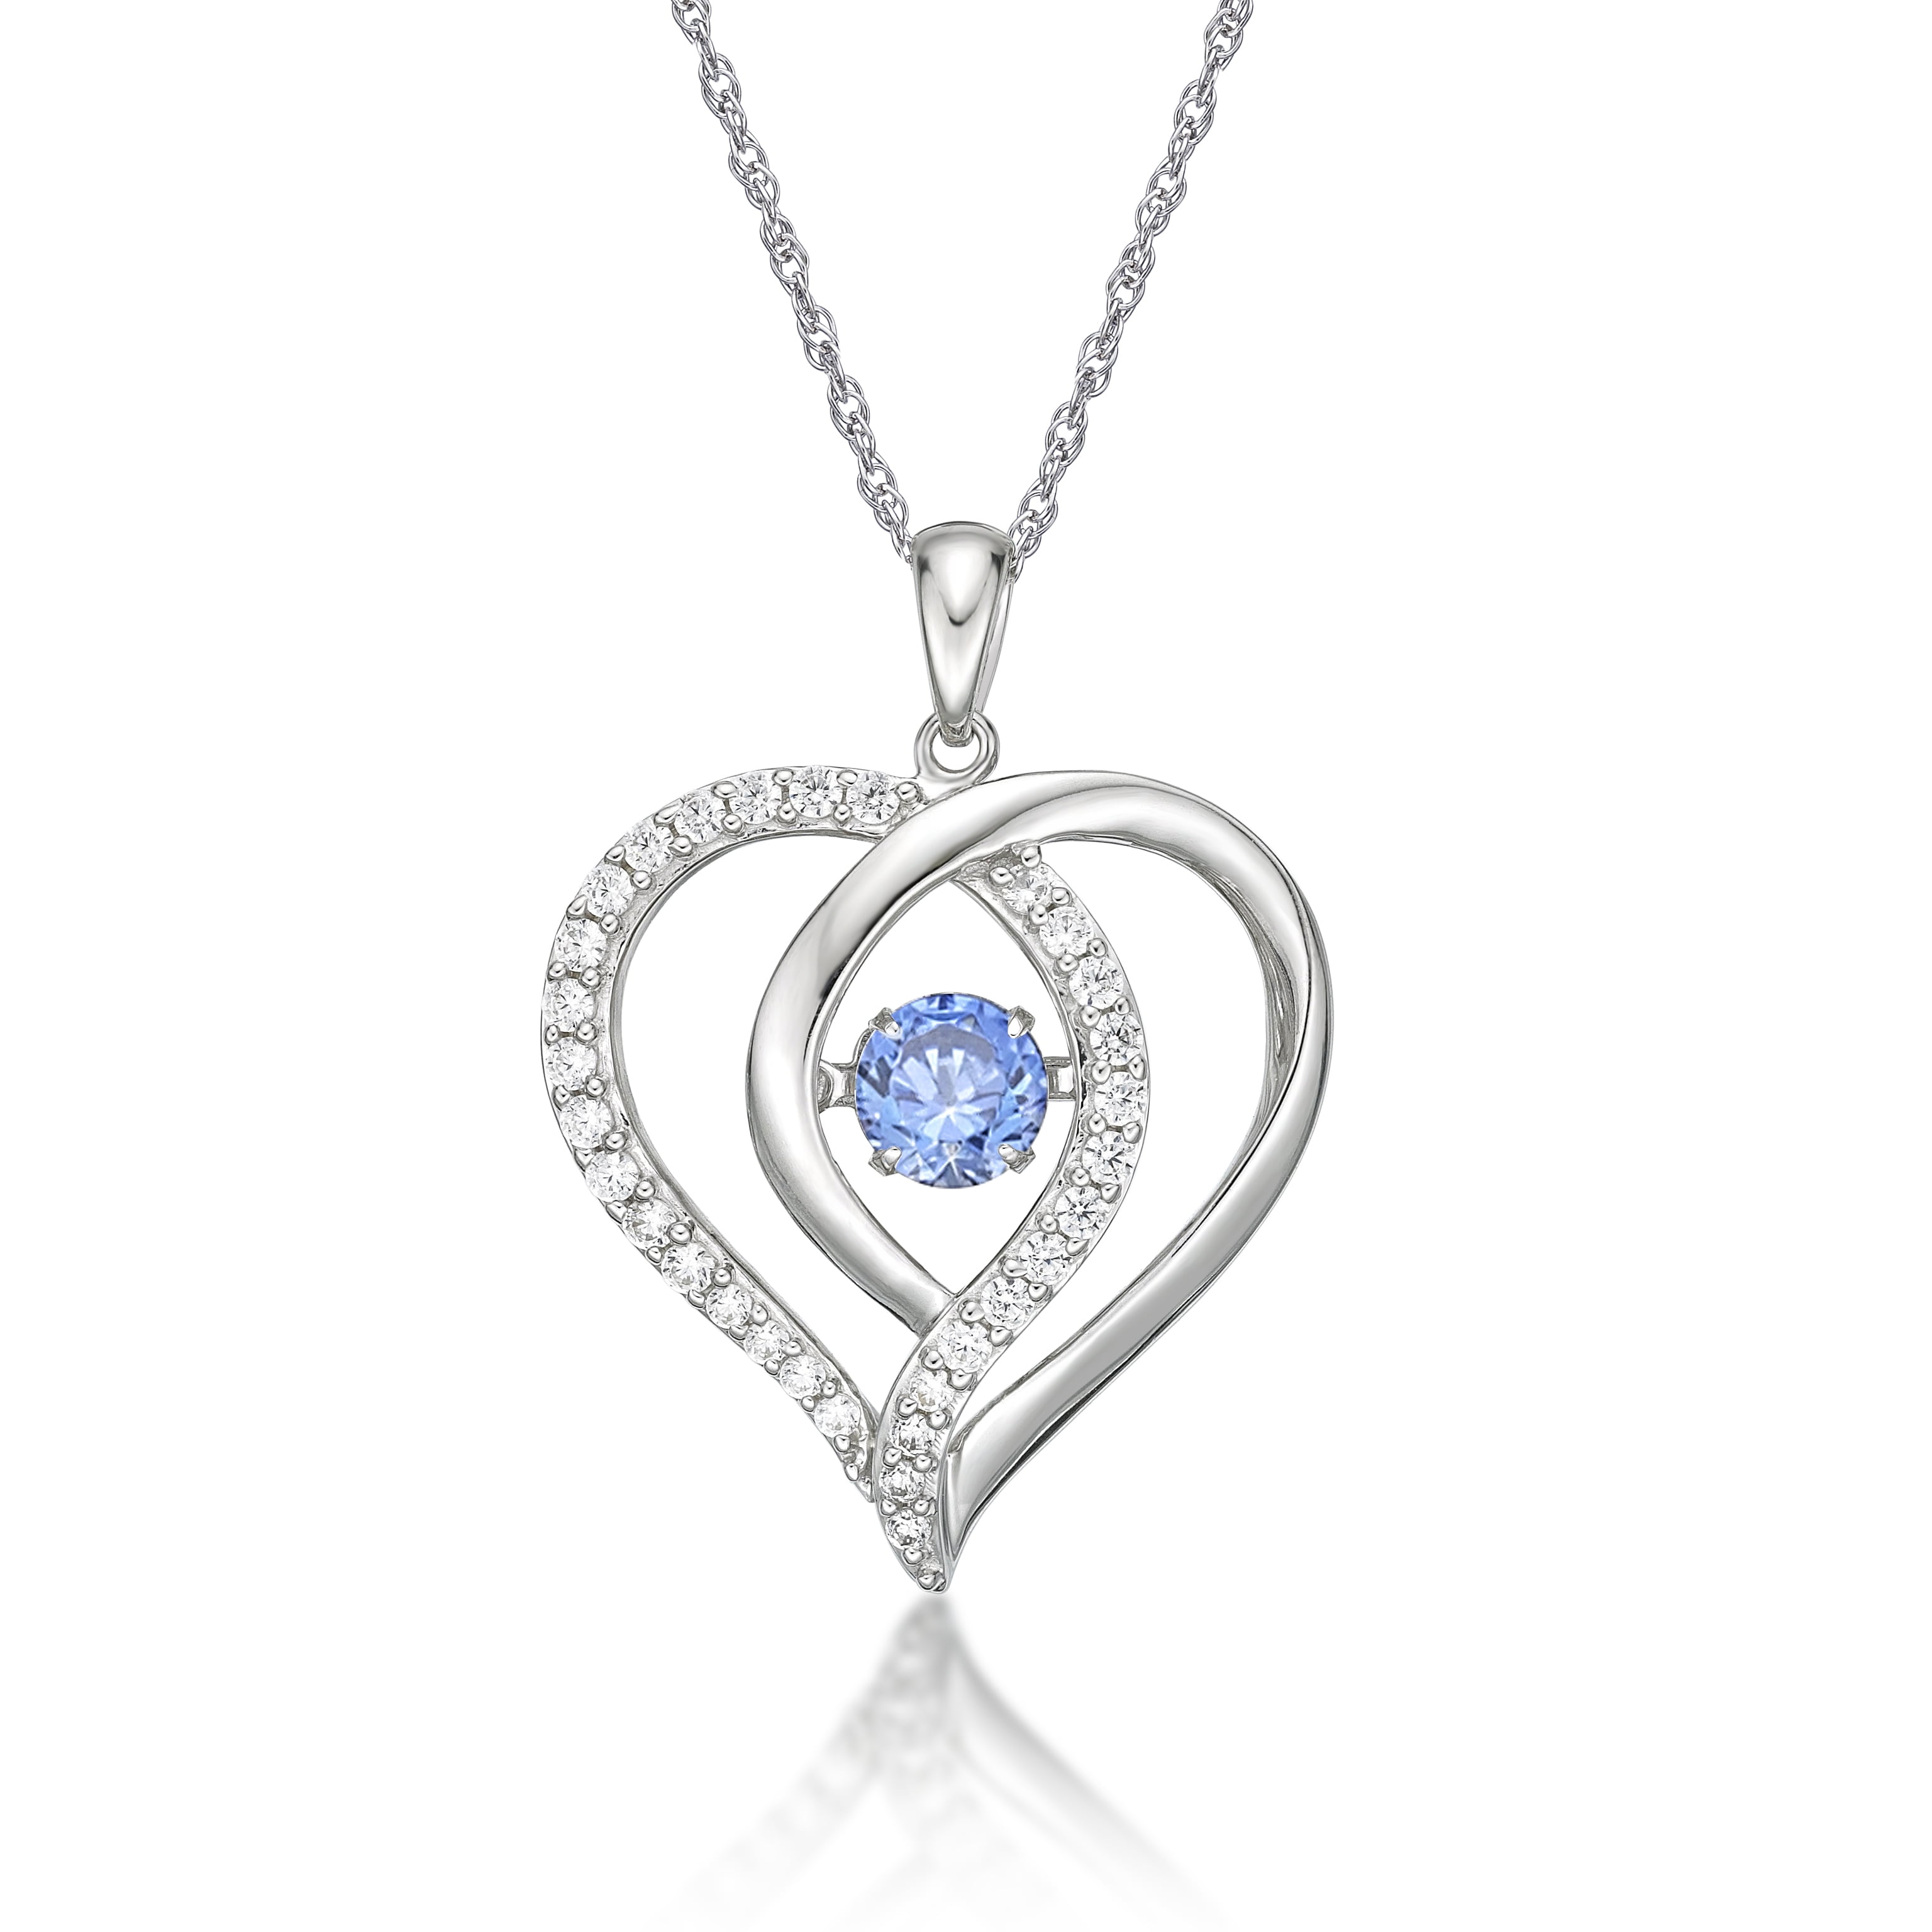 Necklace with a small Swarovski® crystal Heart - Retha Designs